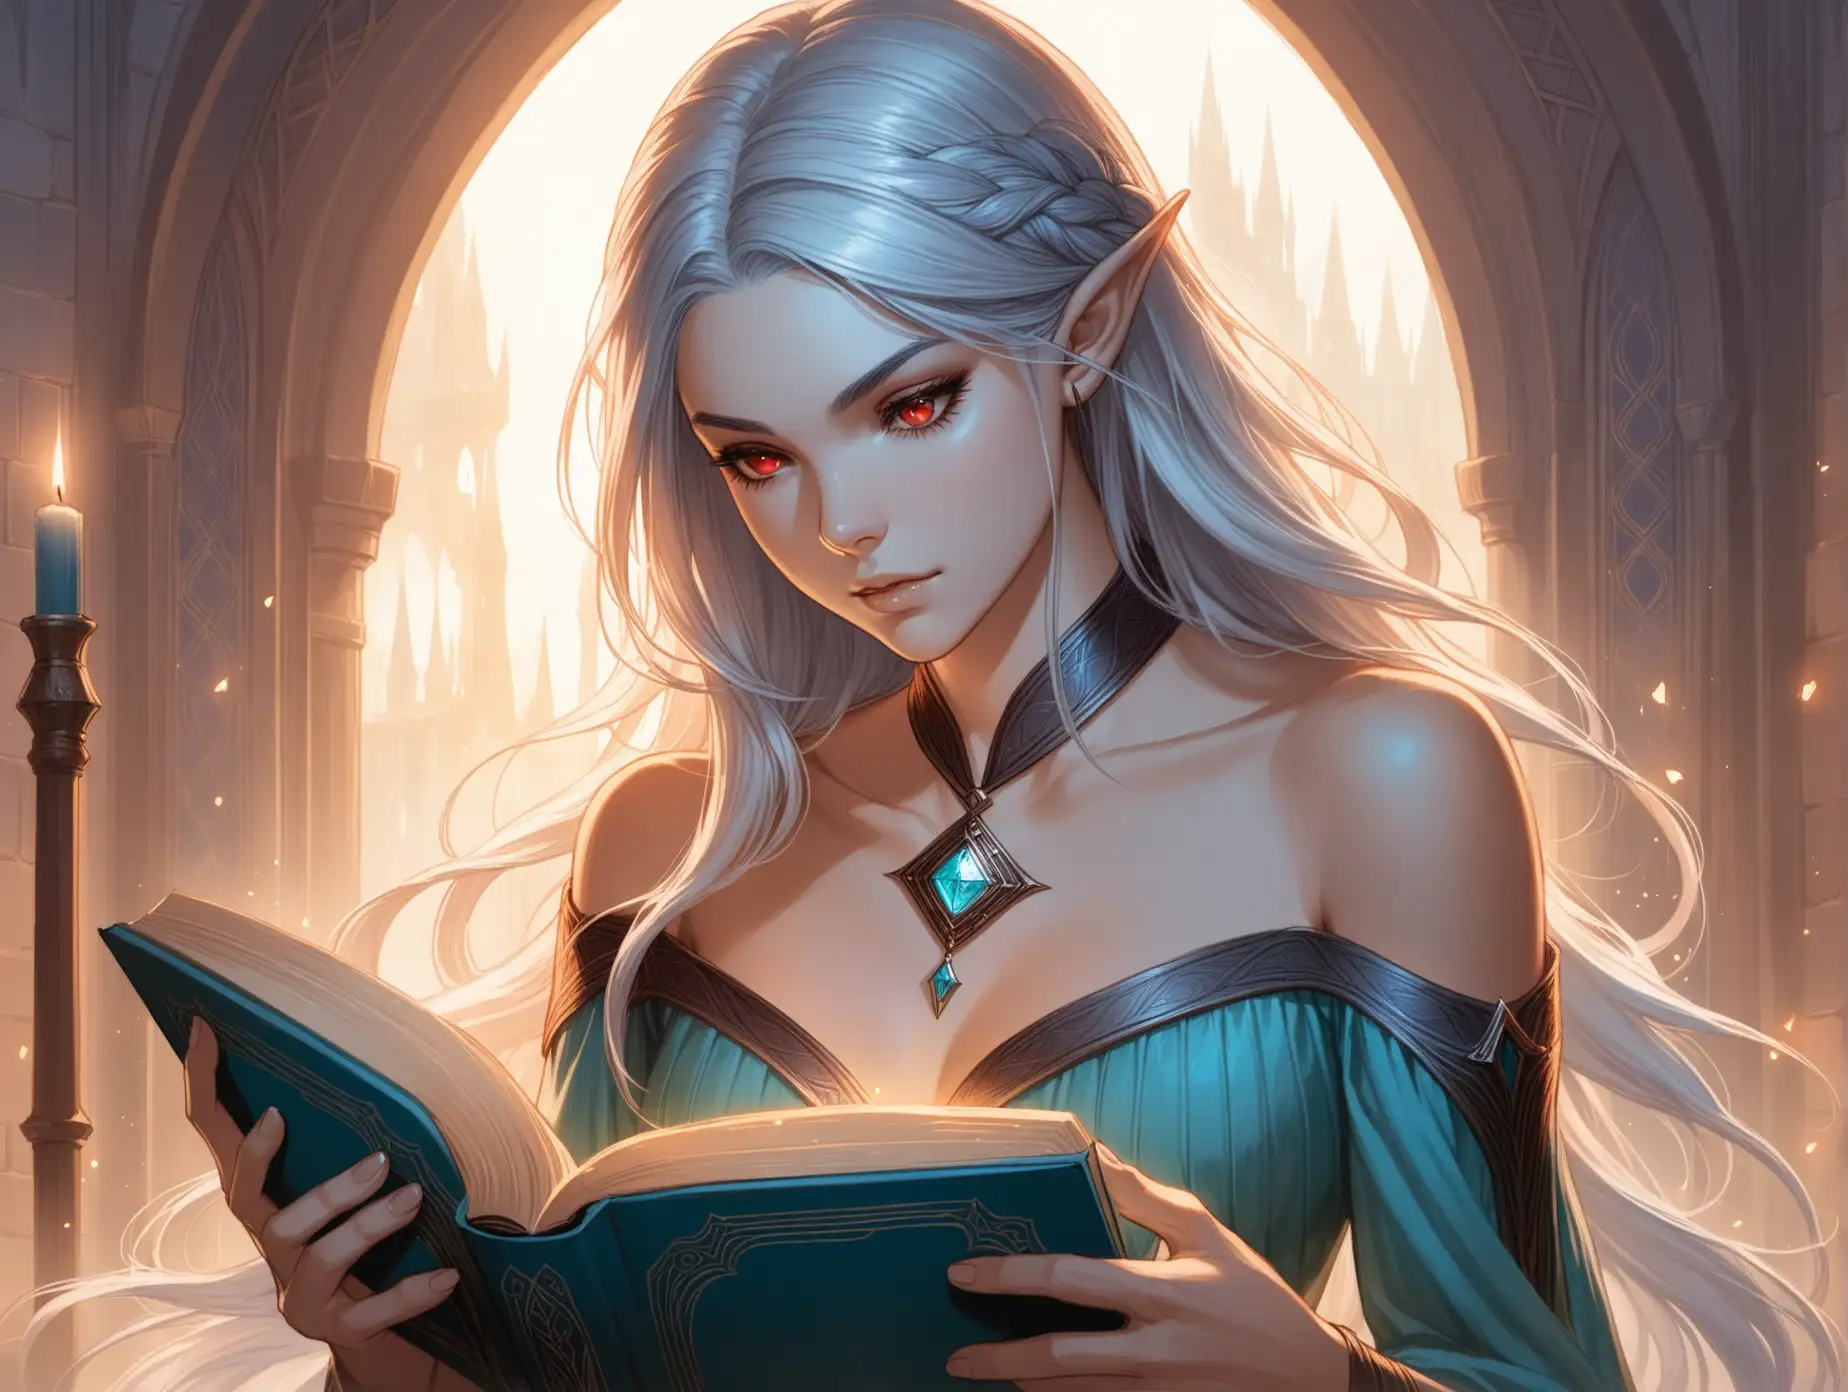 The storyteller mage, dark elf, large chest, gray hair, pale blue skin, red eyes, stern gaze, looks into a book, bare shoulders, amulet, reading a book, Fantasy style, Charlie Bowater, pastel